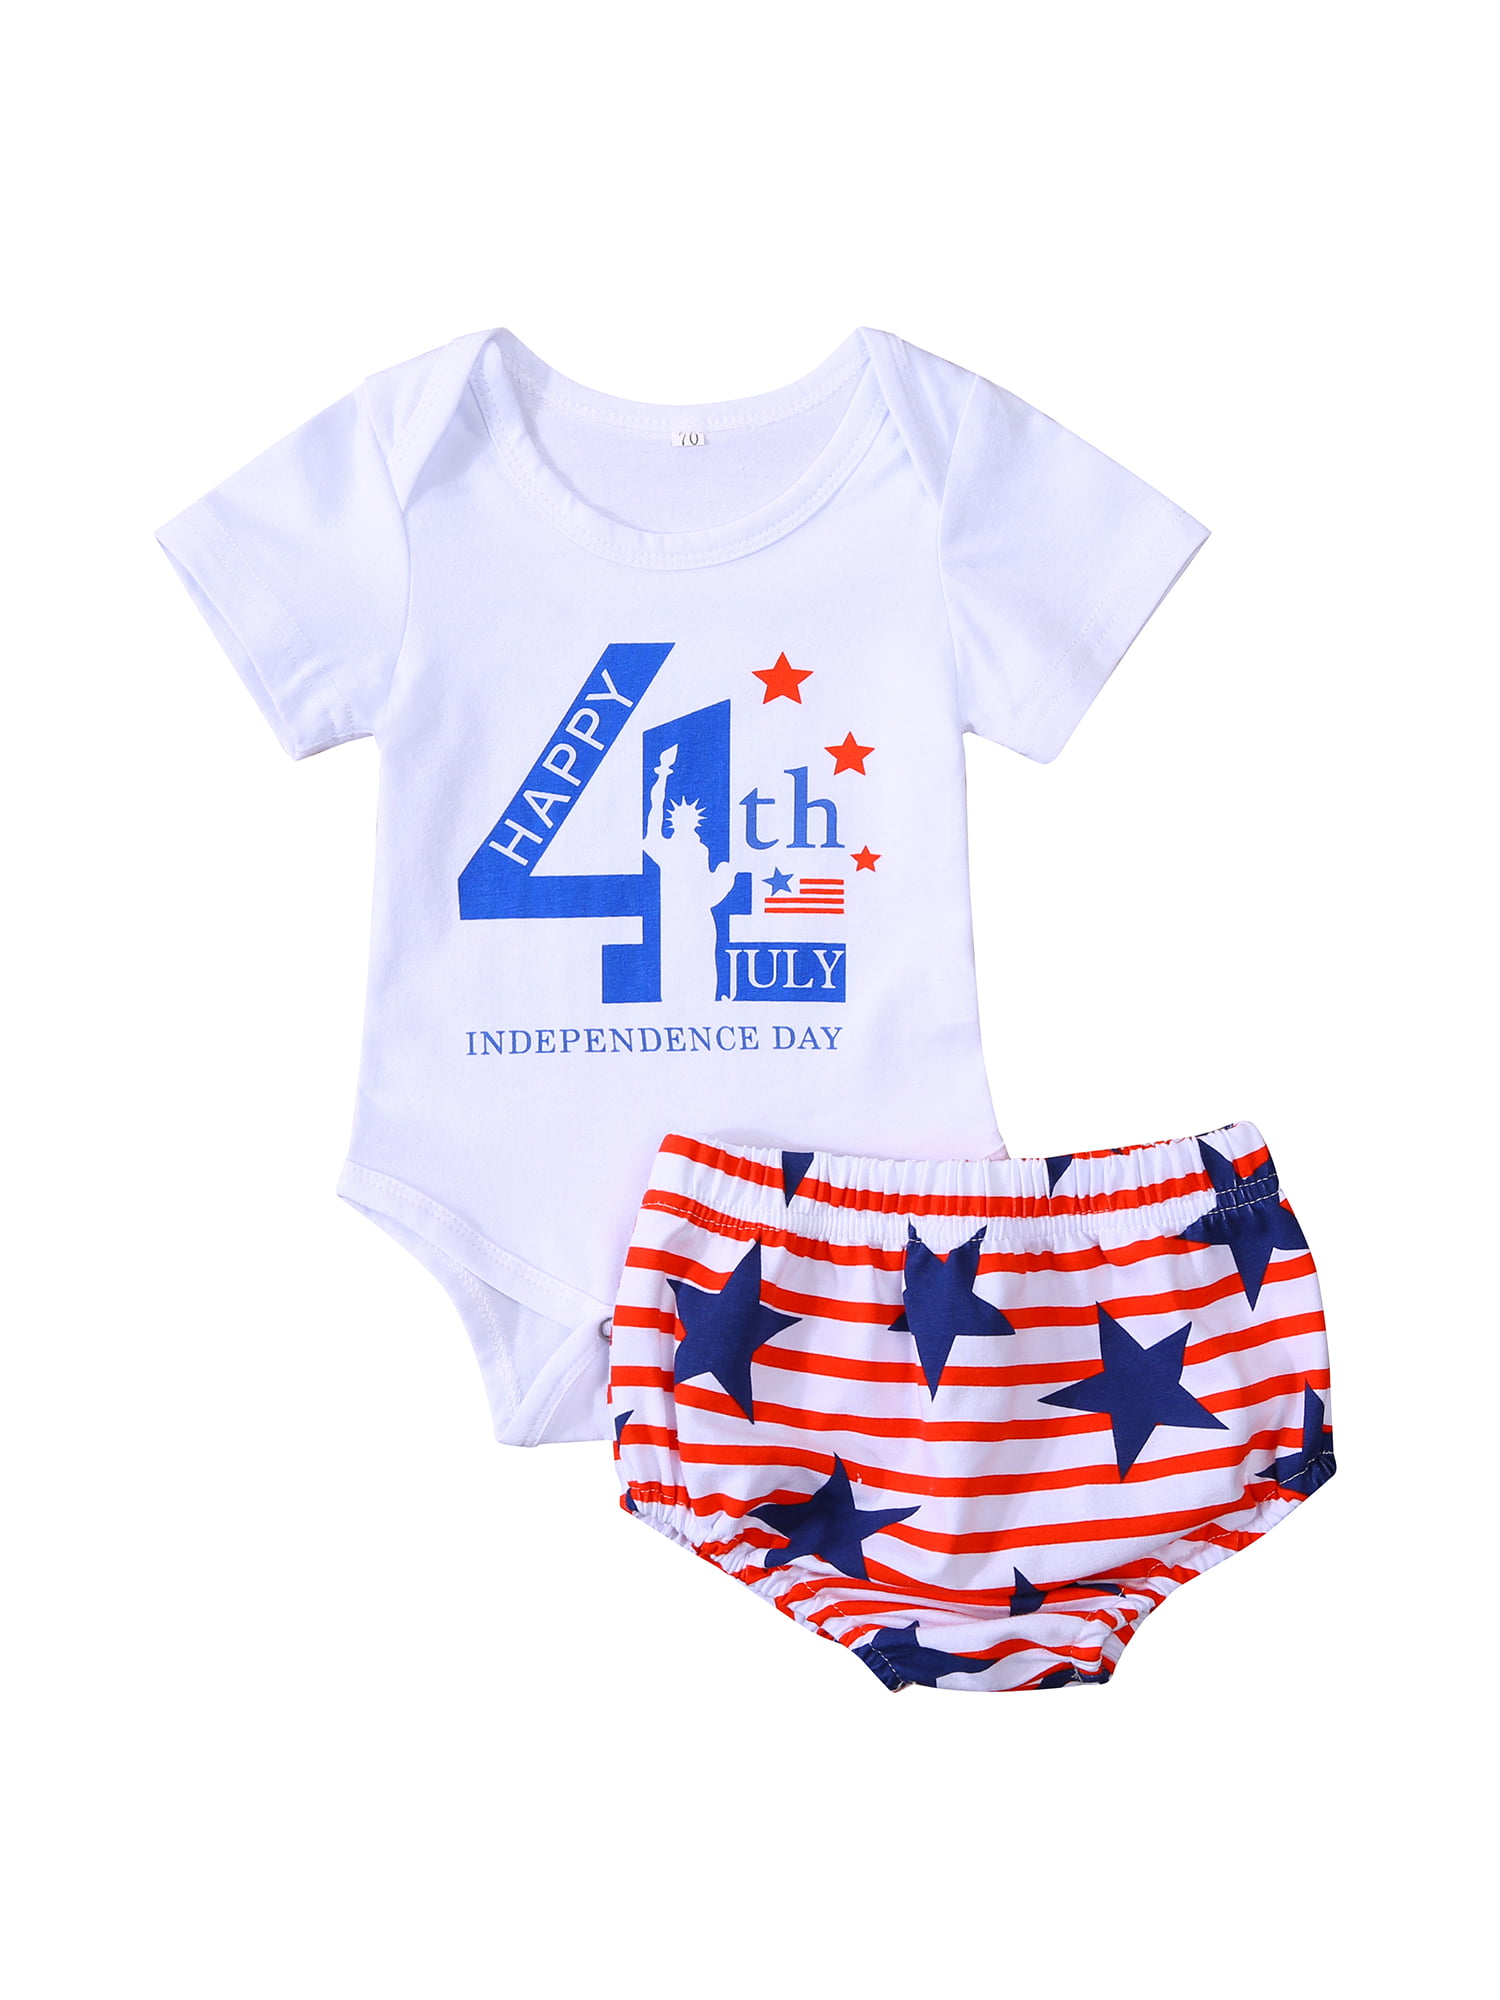 American Flag Short Pants Independence Day Clothes Set Newborn My First 4th of July Baby Boys Outfits Romper 